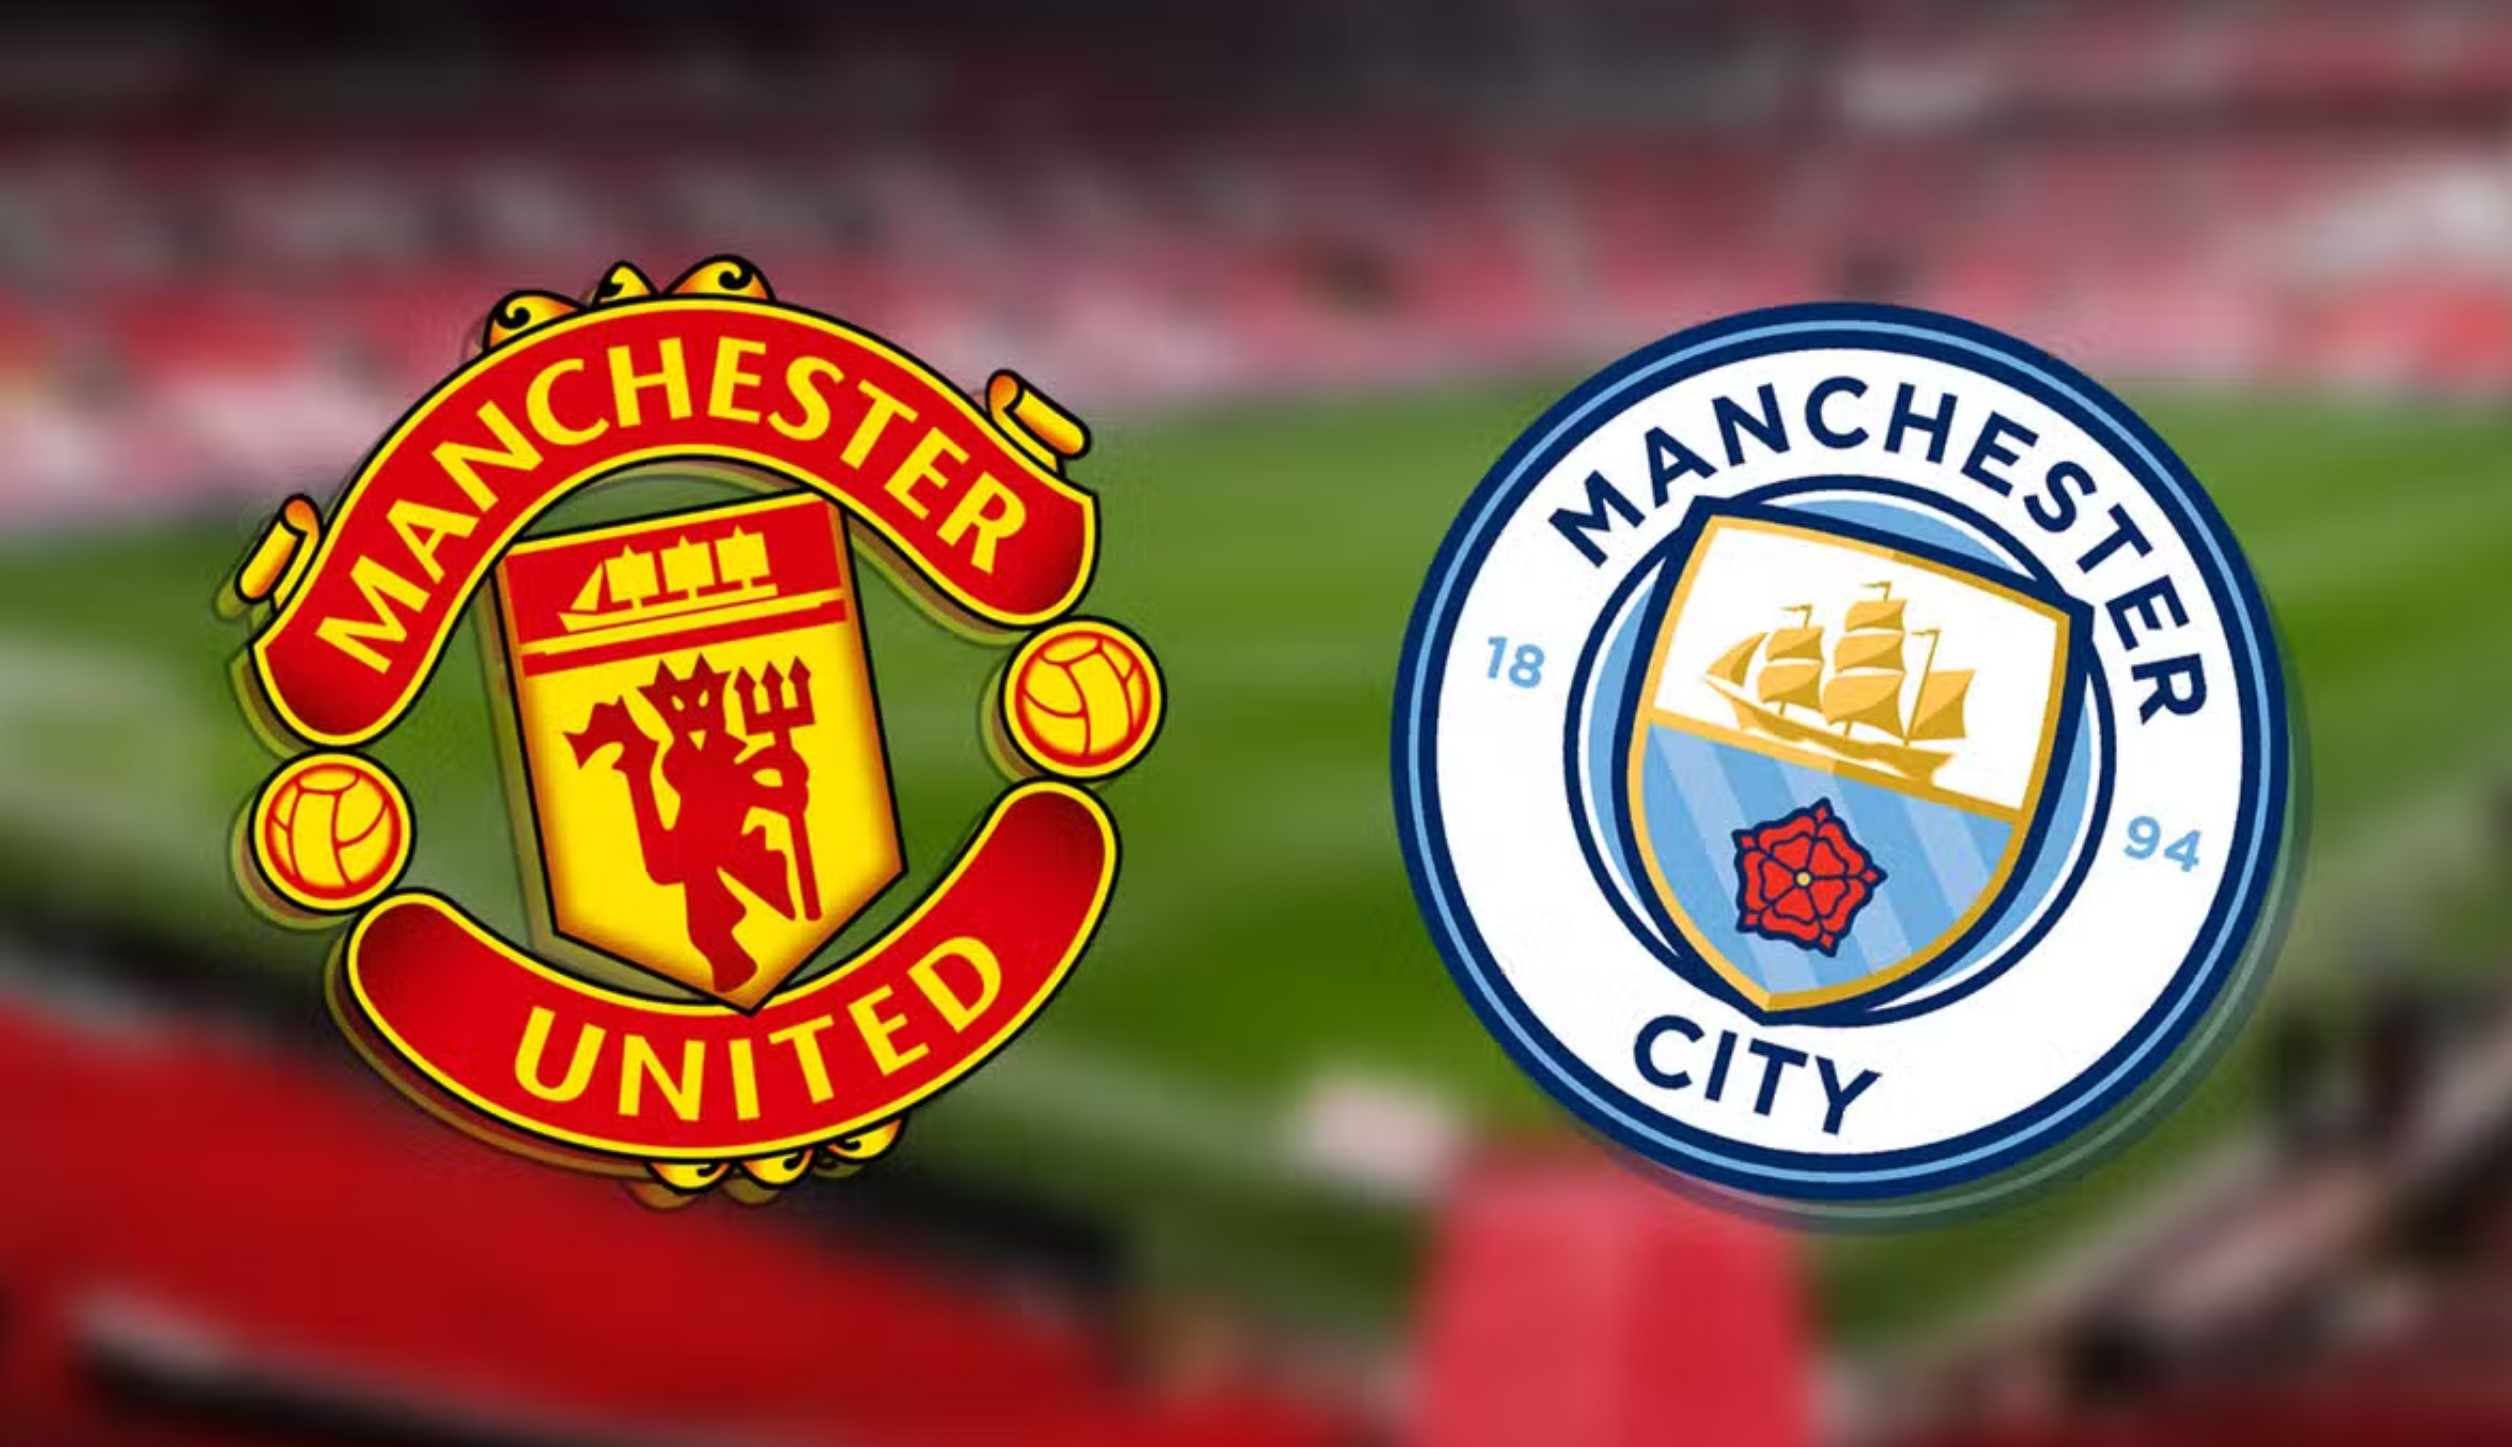 Manchester united manchester city streaming gratuit free